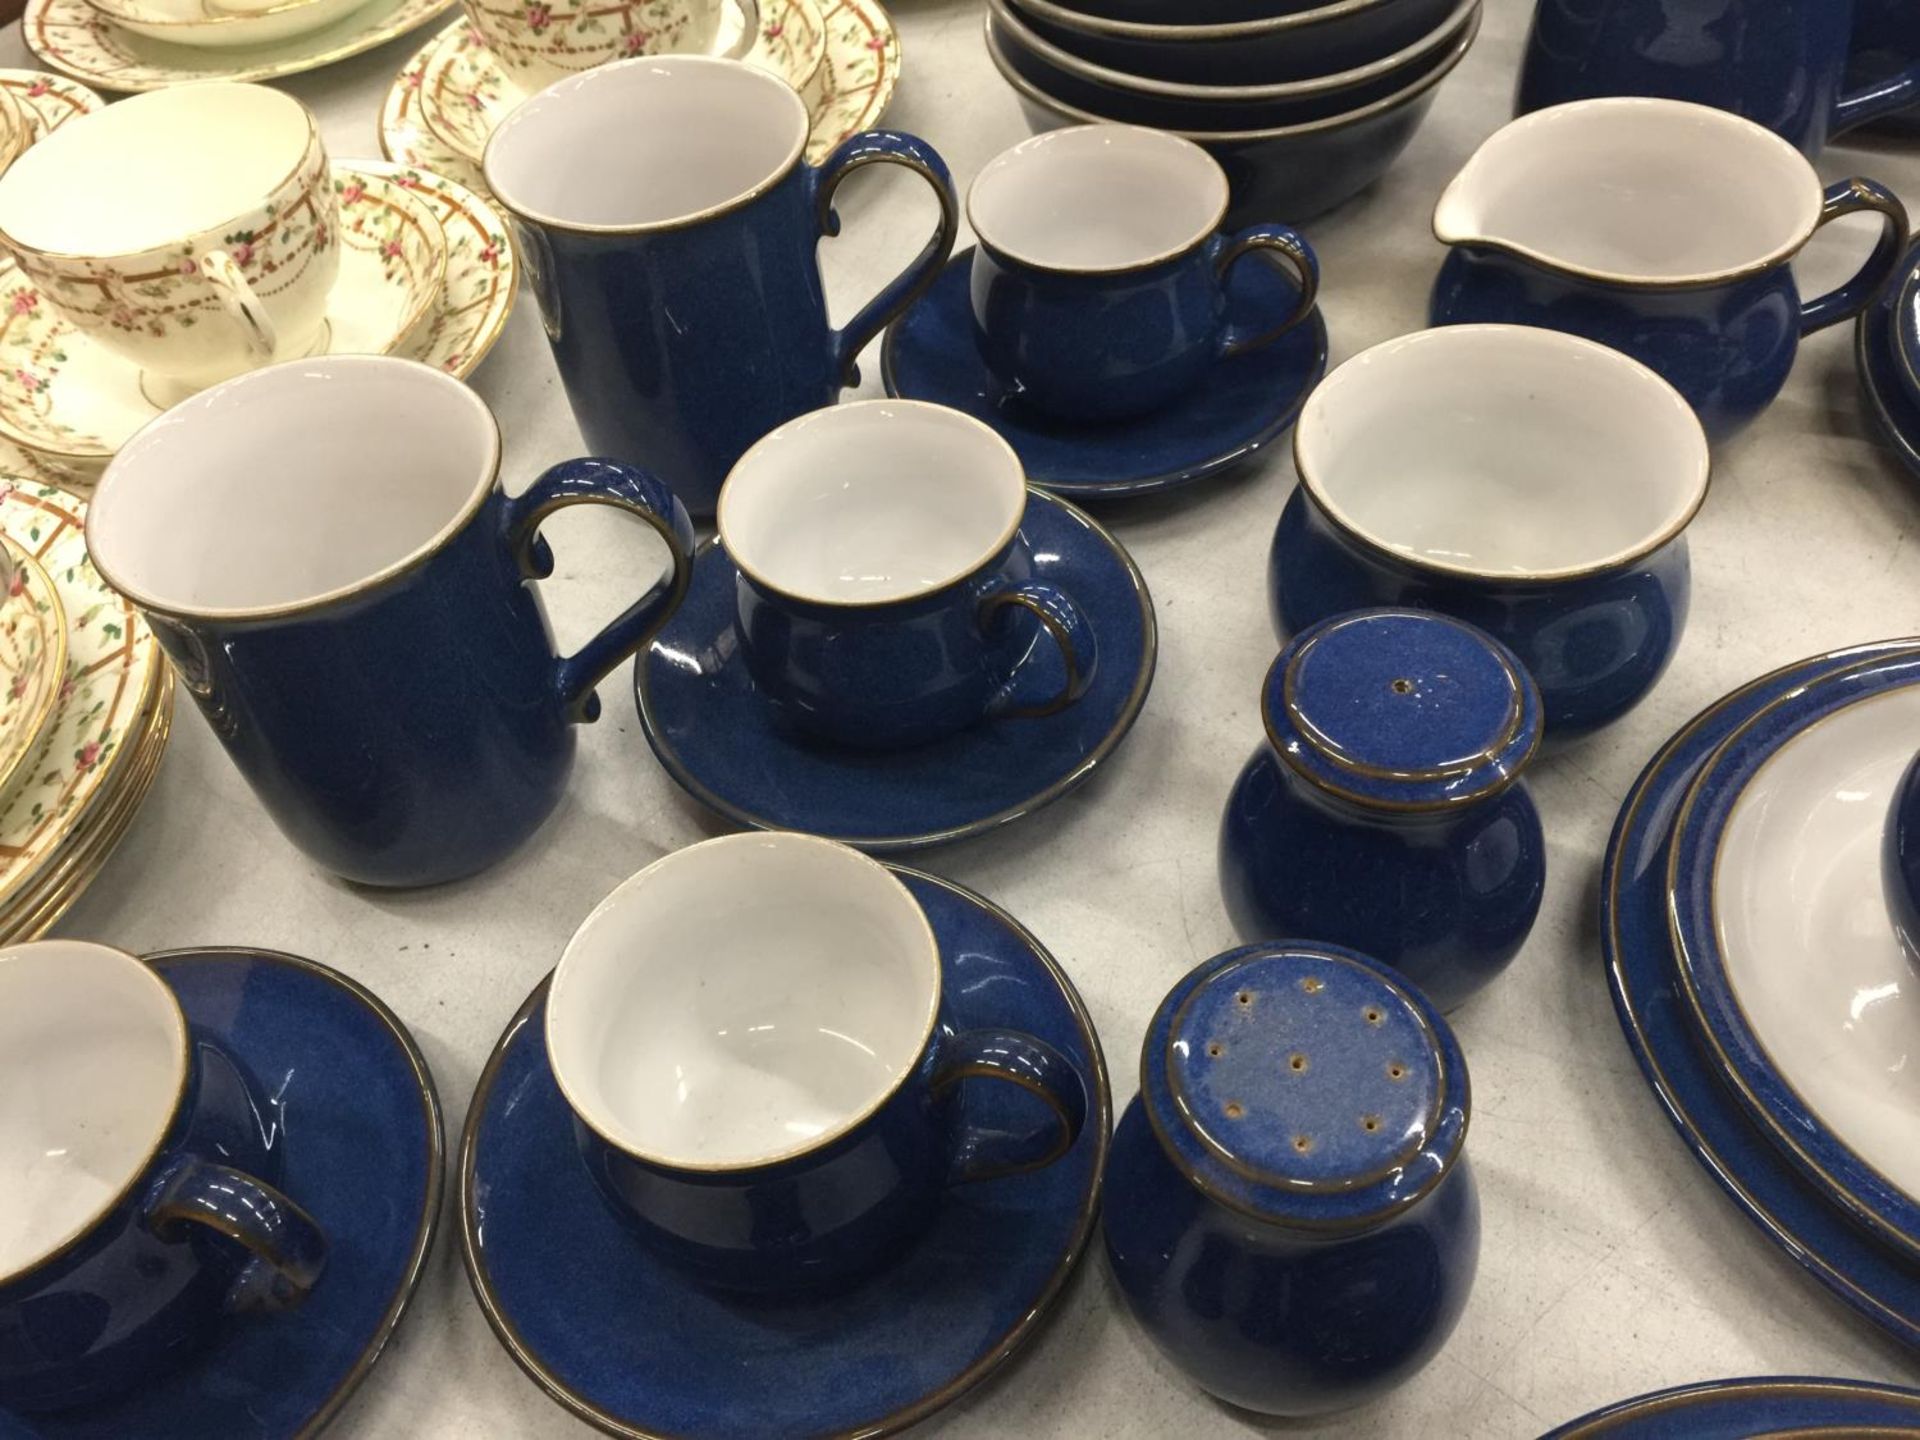 A DENBY DINNER SERVICE IN BLUE TO INCLUDE PLATES, BOWLS, TEAPOTS, SERVING TUREEN, MILK JUGS, SUGAR - Image 4 of 9